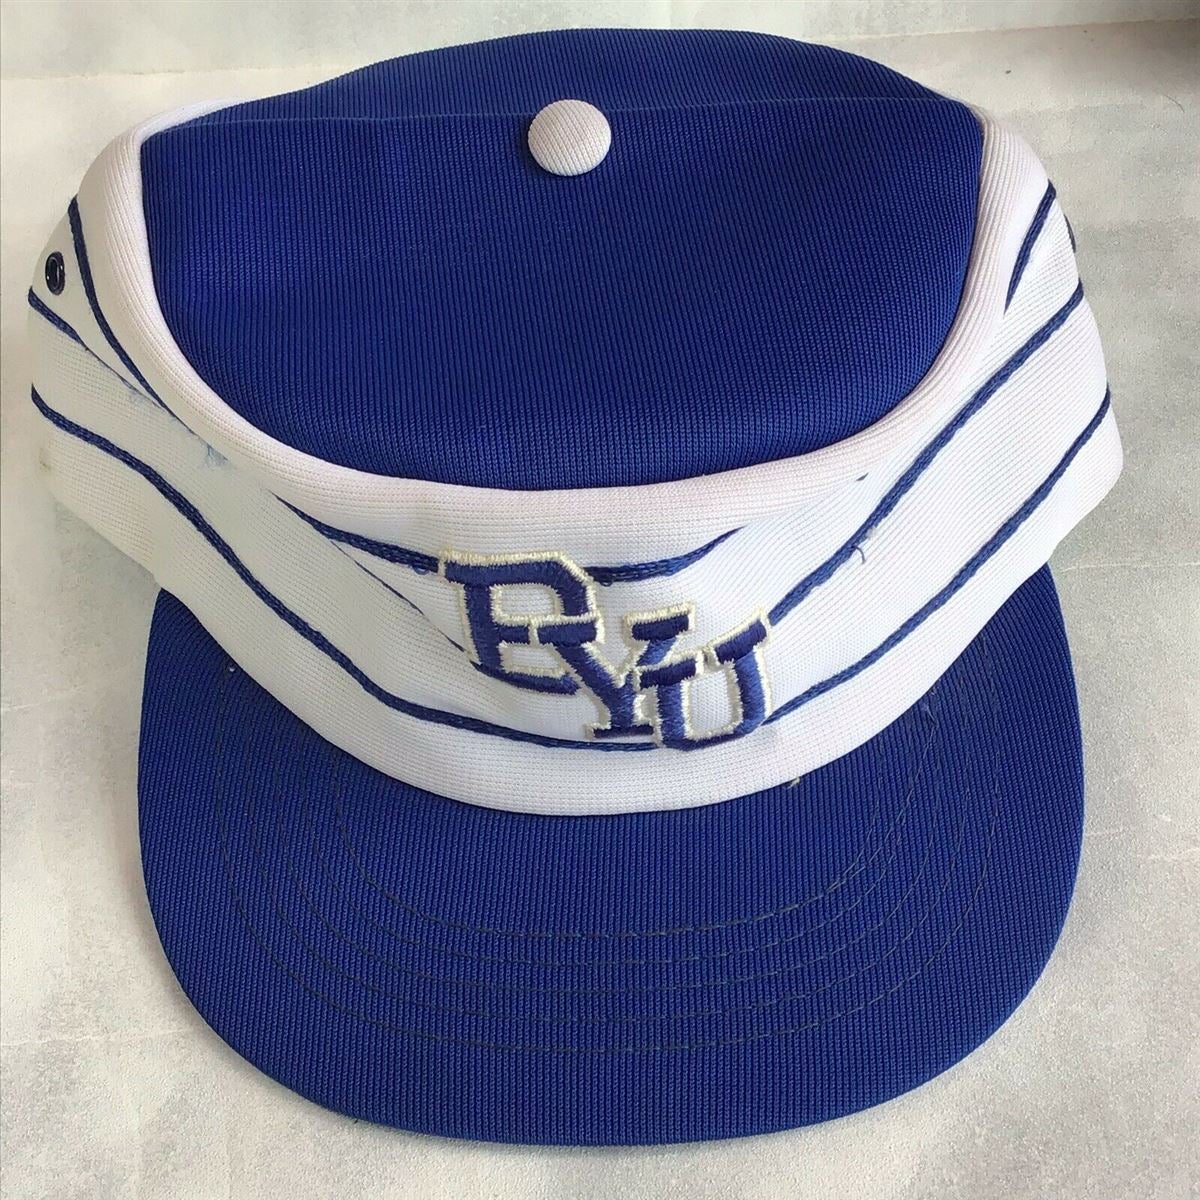 The 15 Best BYU Items On eBay Right Now - Round 2